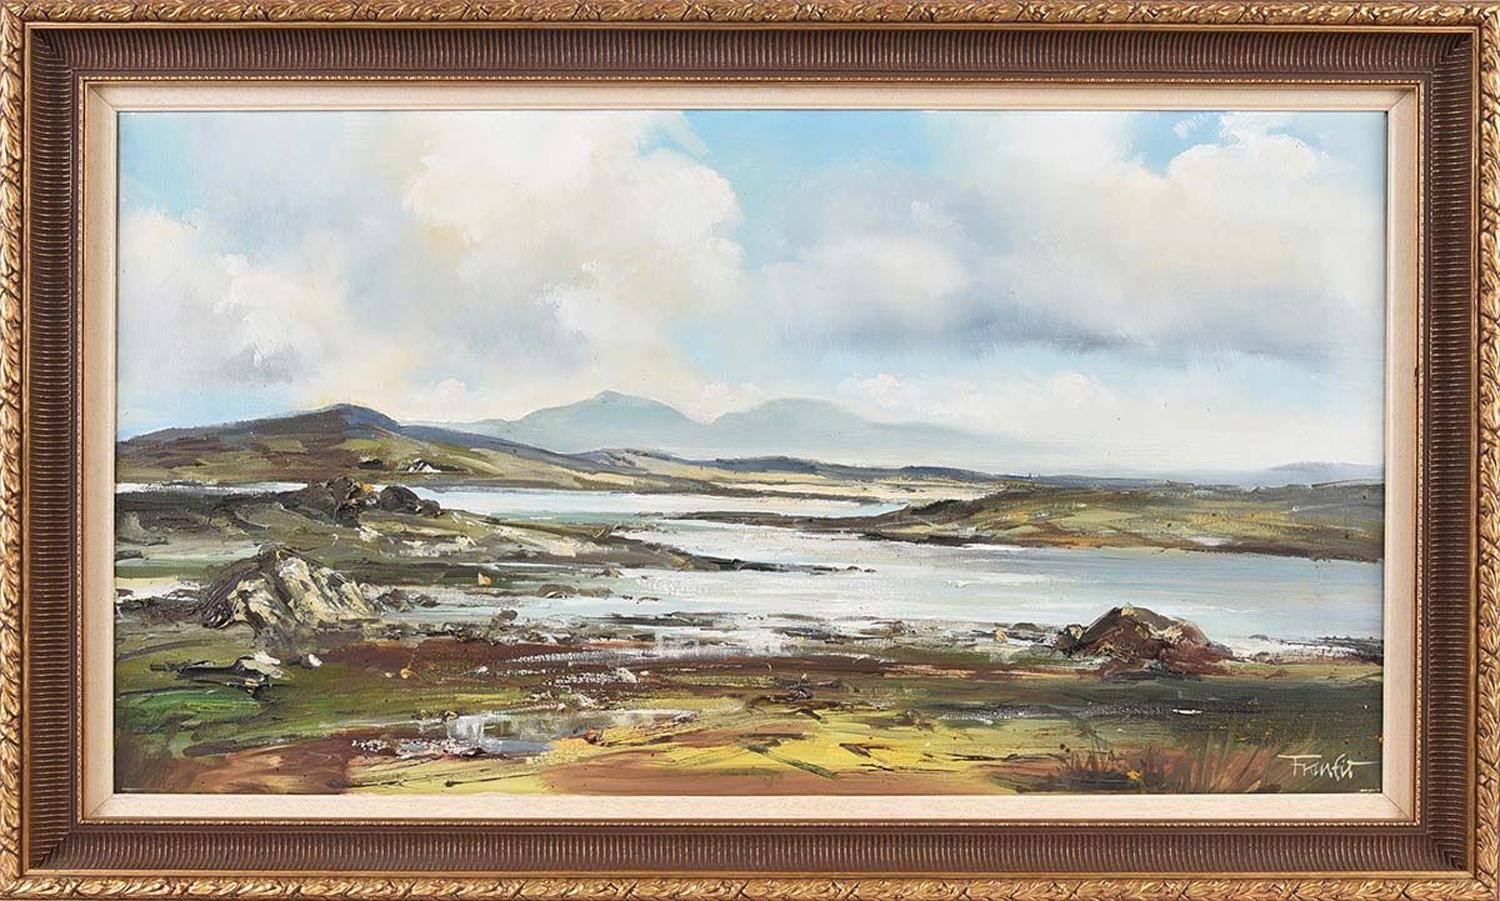 Frank Fitzsimons Figurative Painting - Expressive Abstract Landscape Painting of Ireland by Contemporary Irish Artist